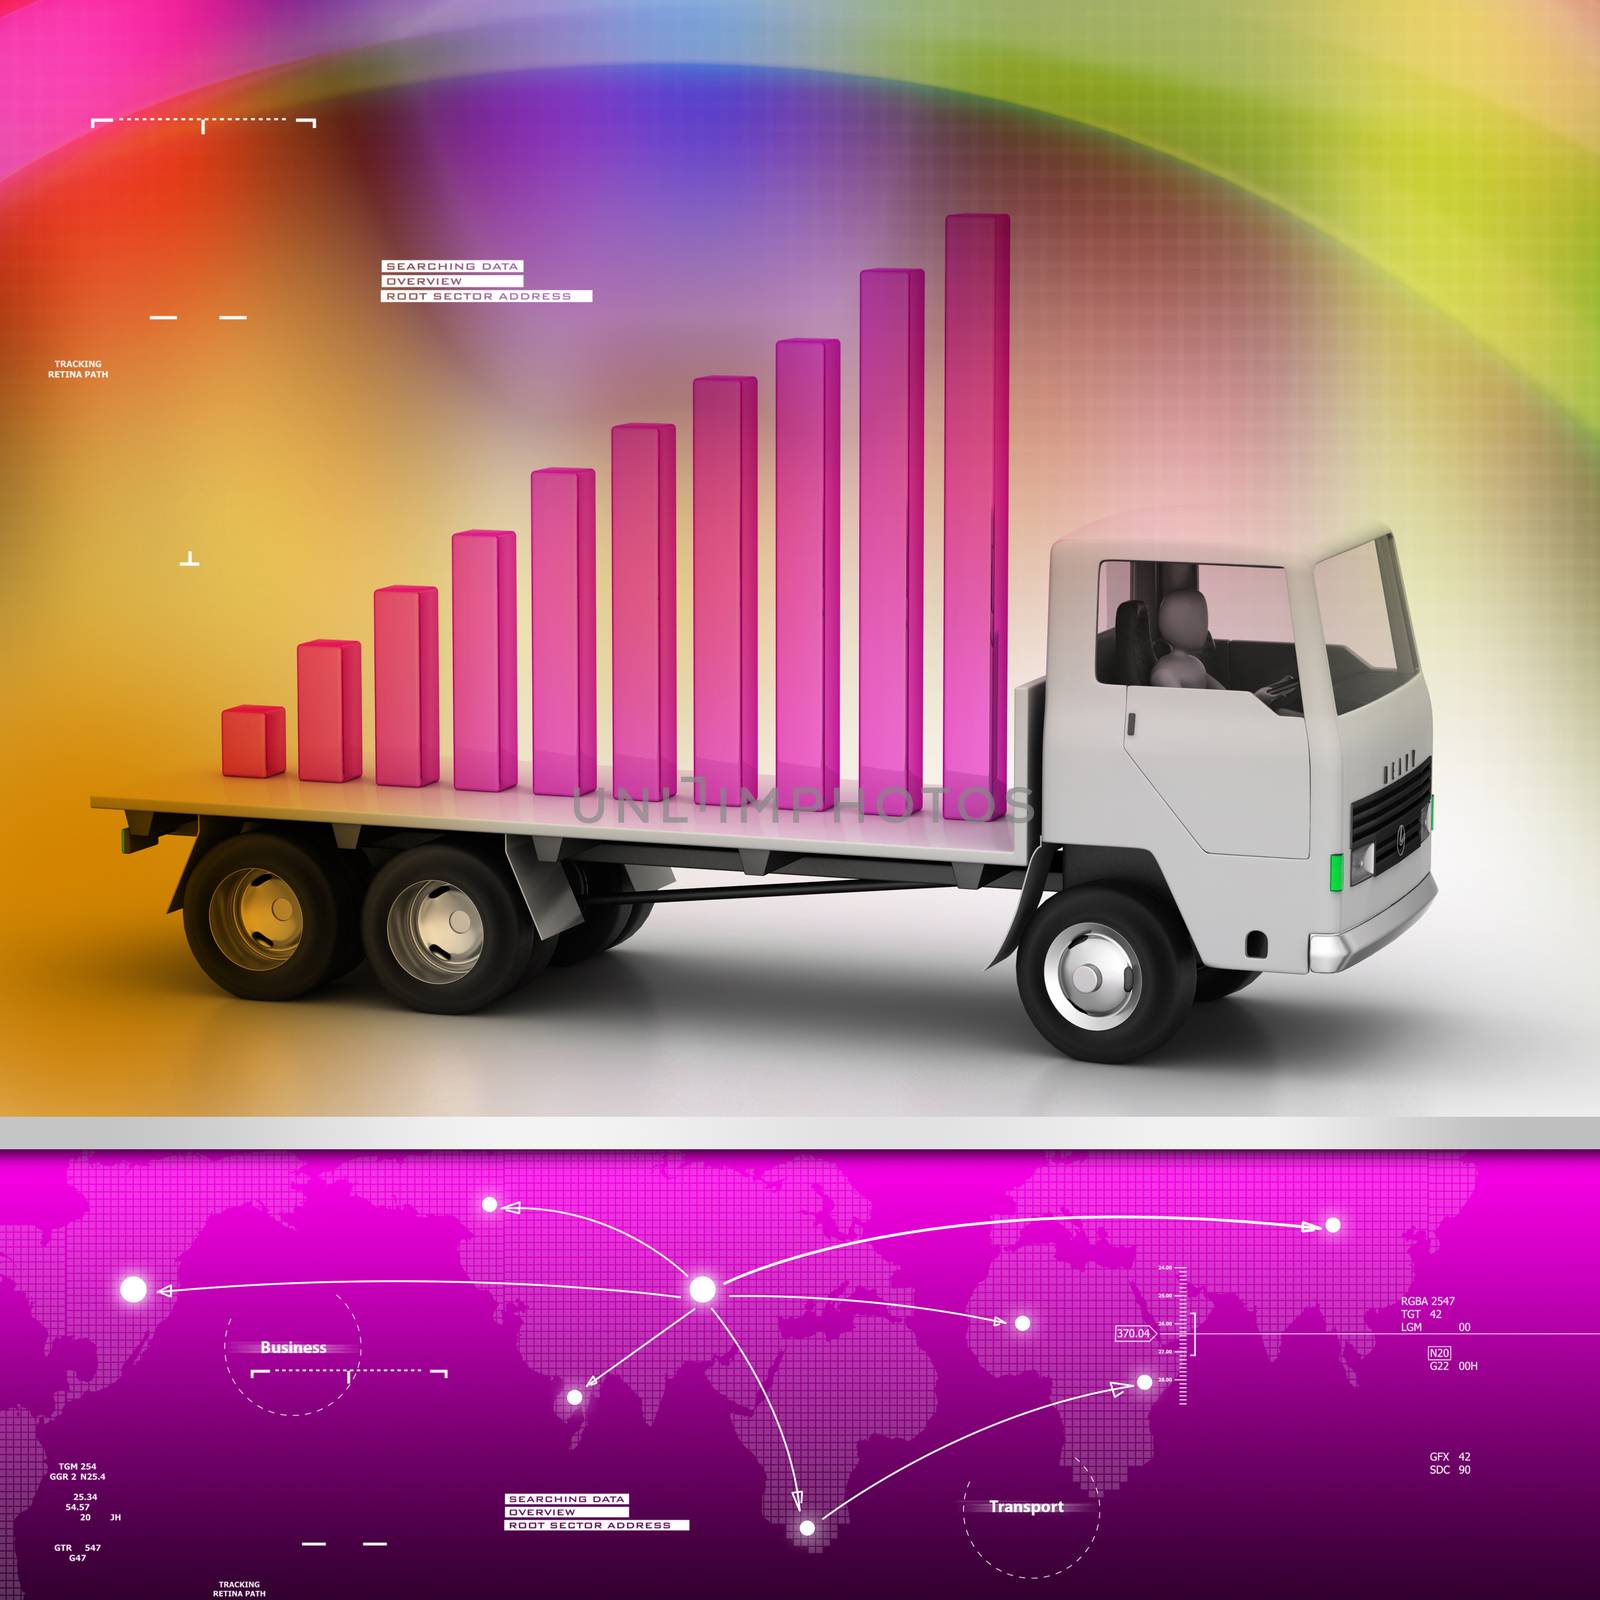 Transportation of business graph in truck by cuteimage